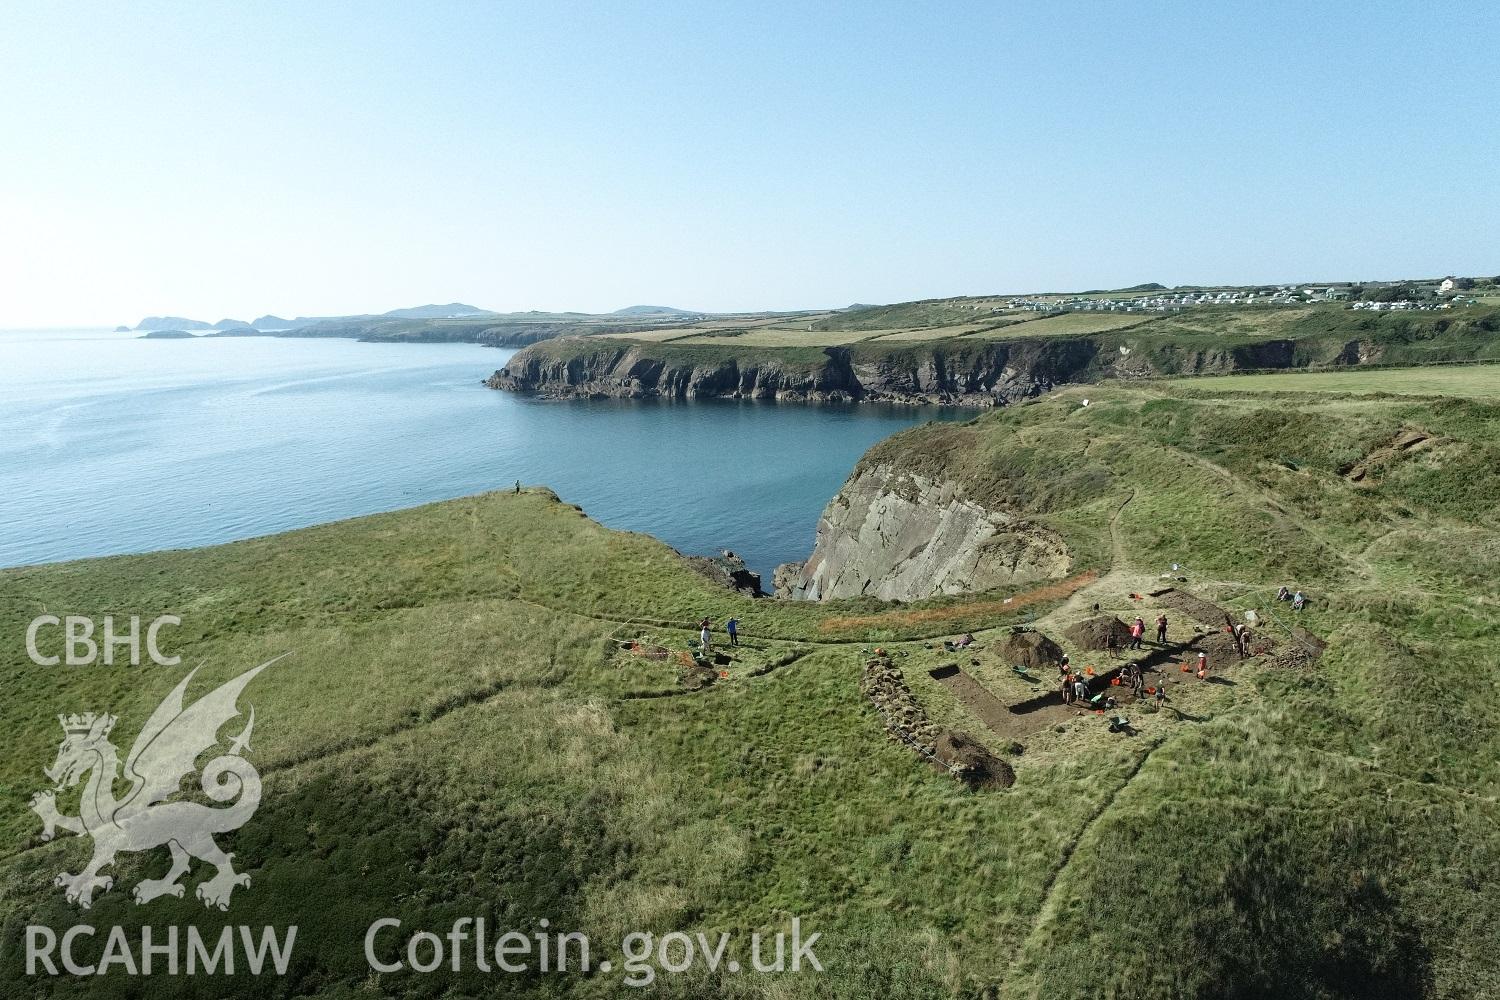 Aerial shot of excavations at Caerfai Taken by Louise Barker. Produced with EU funds through the Ireland Wales Co-operation Programme 2014-2023. All material made freely available through the Open Government Licence.